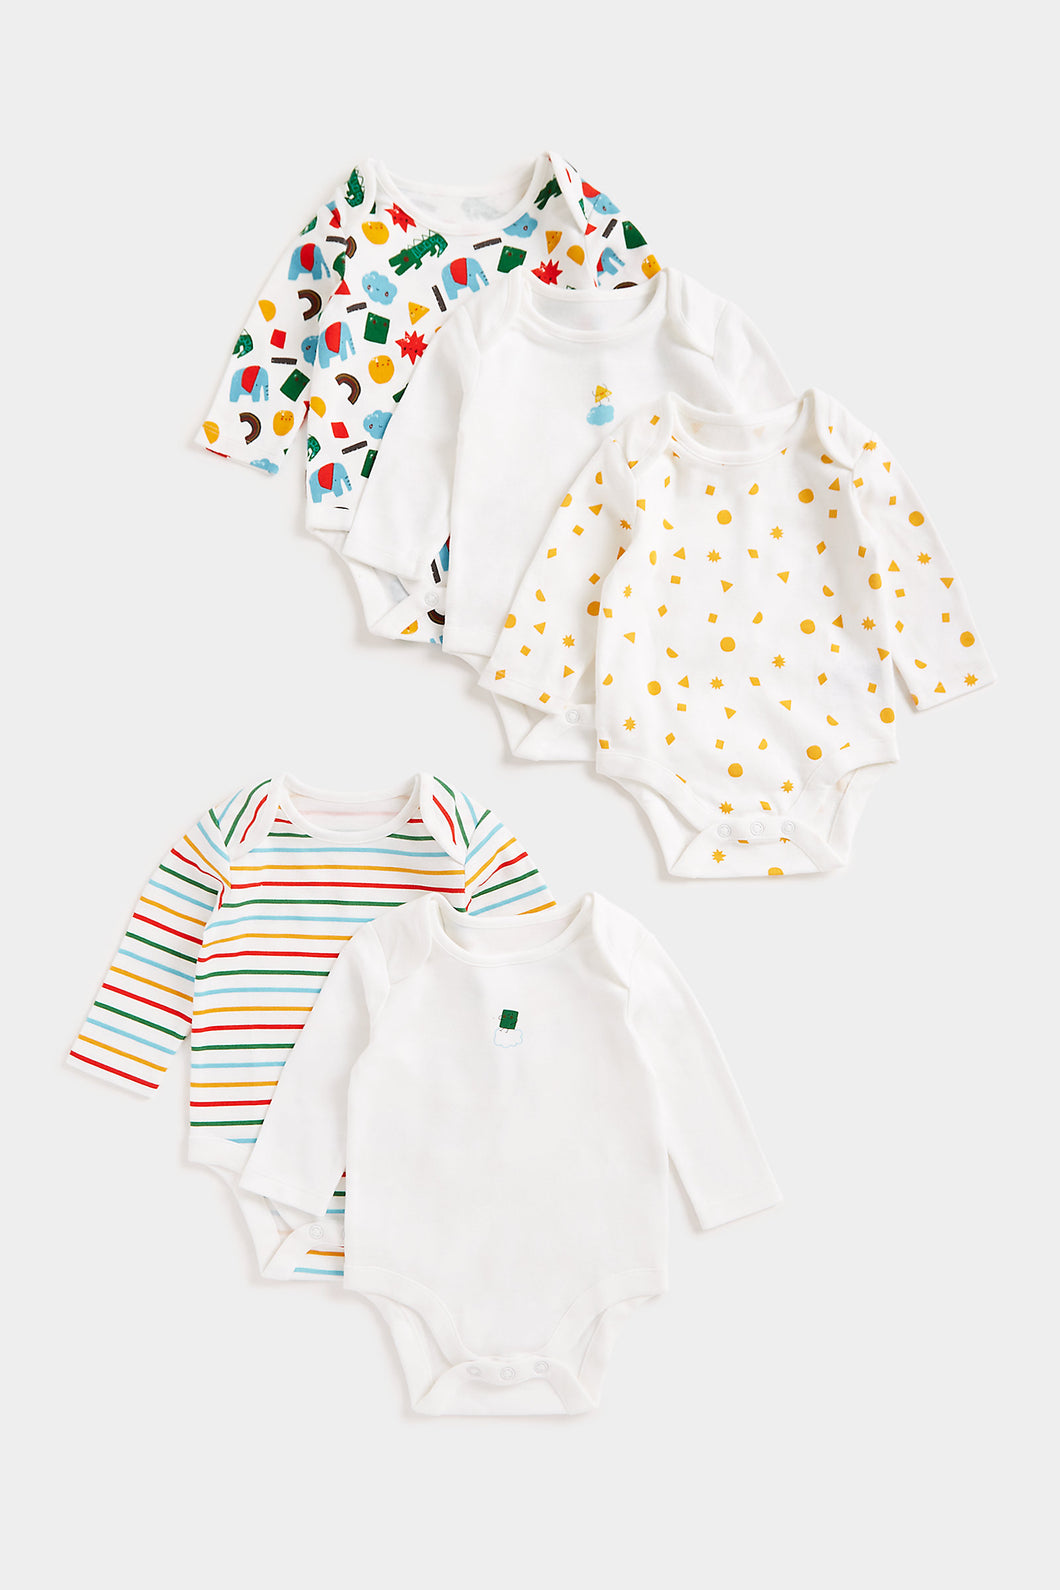 Mothercare Bright Long-Sleeved Bodysuits - 5 Pack